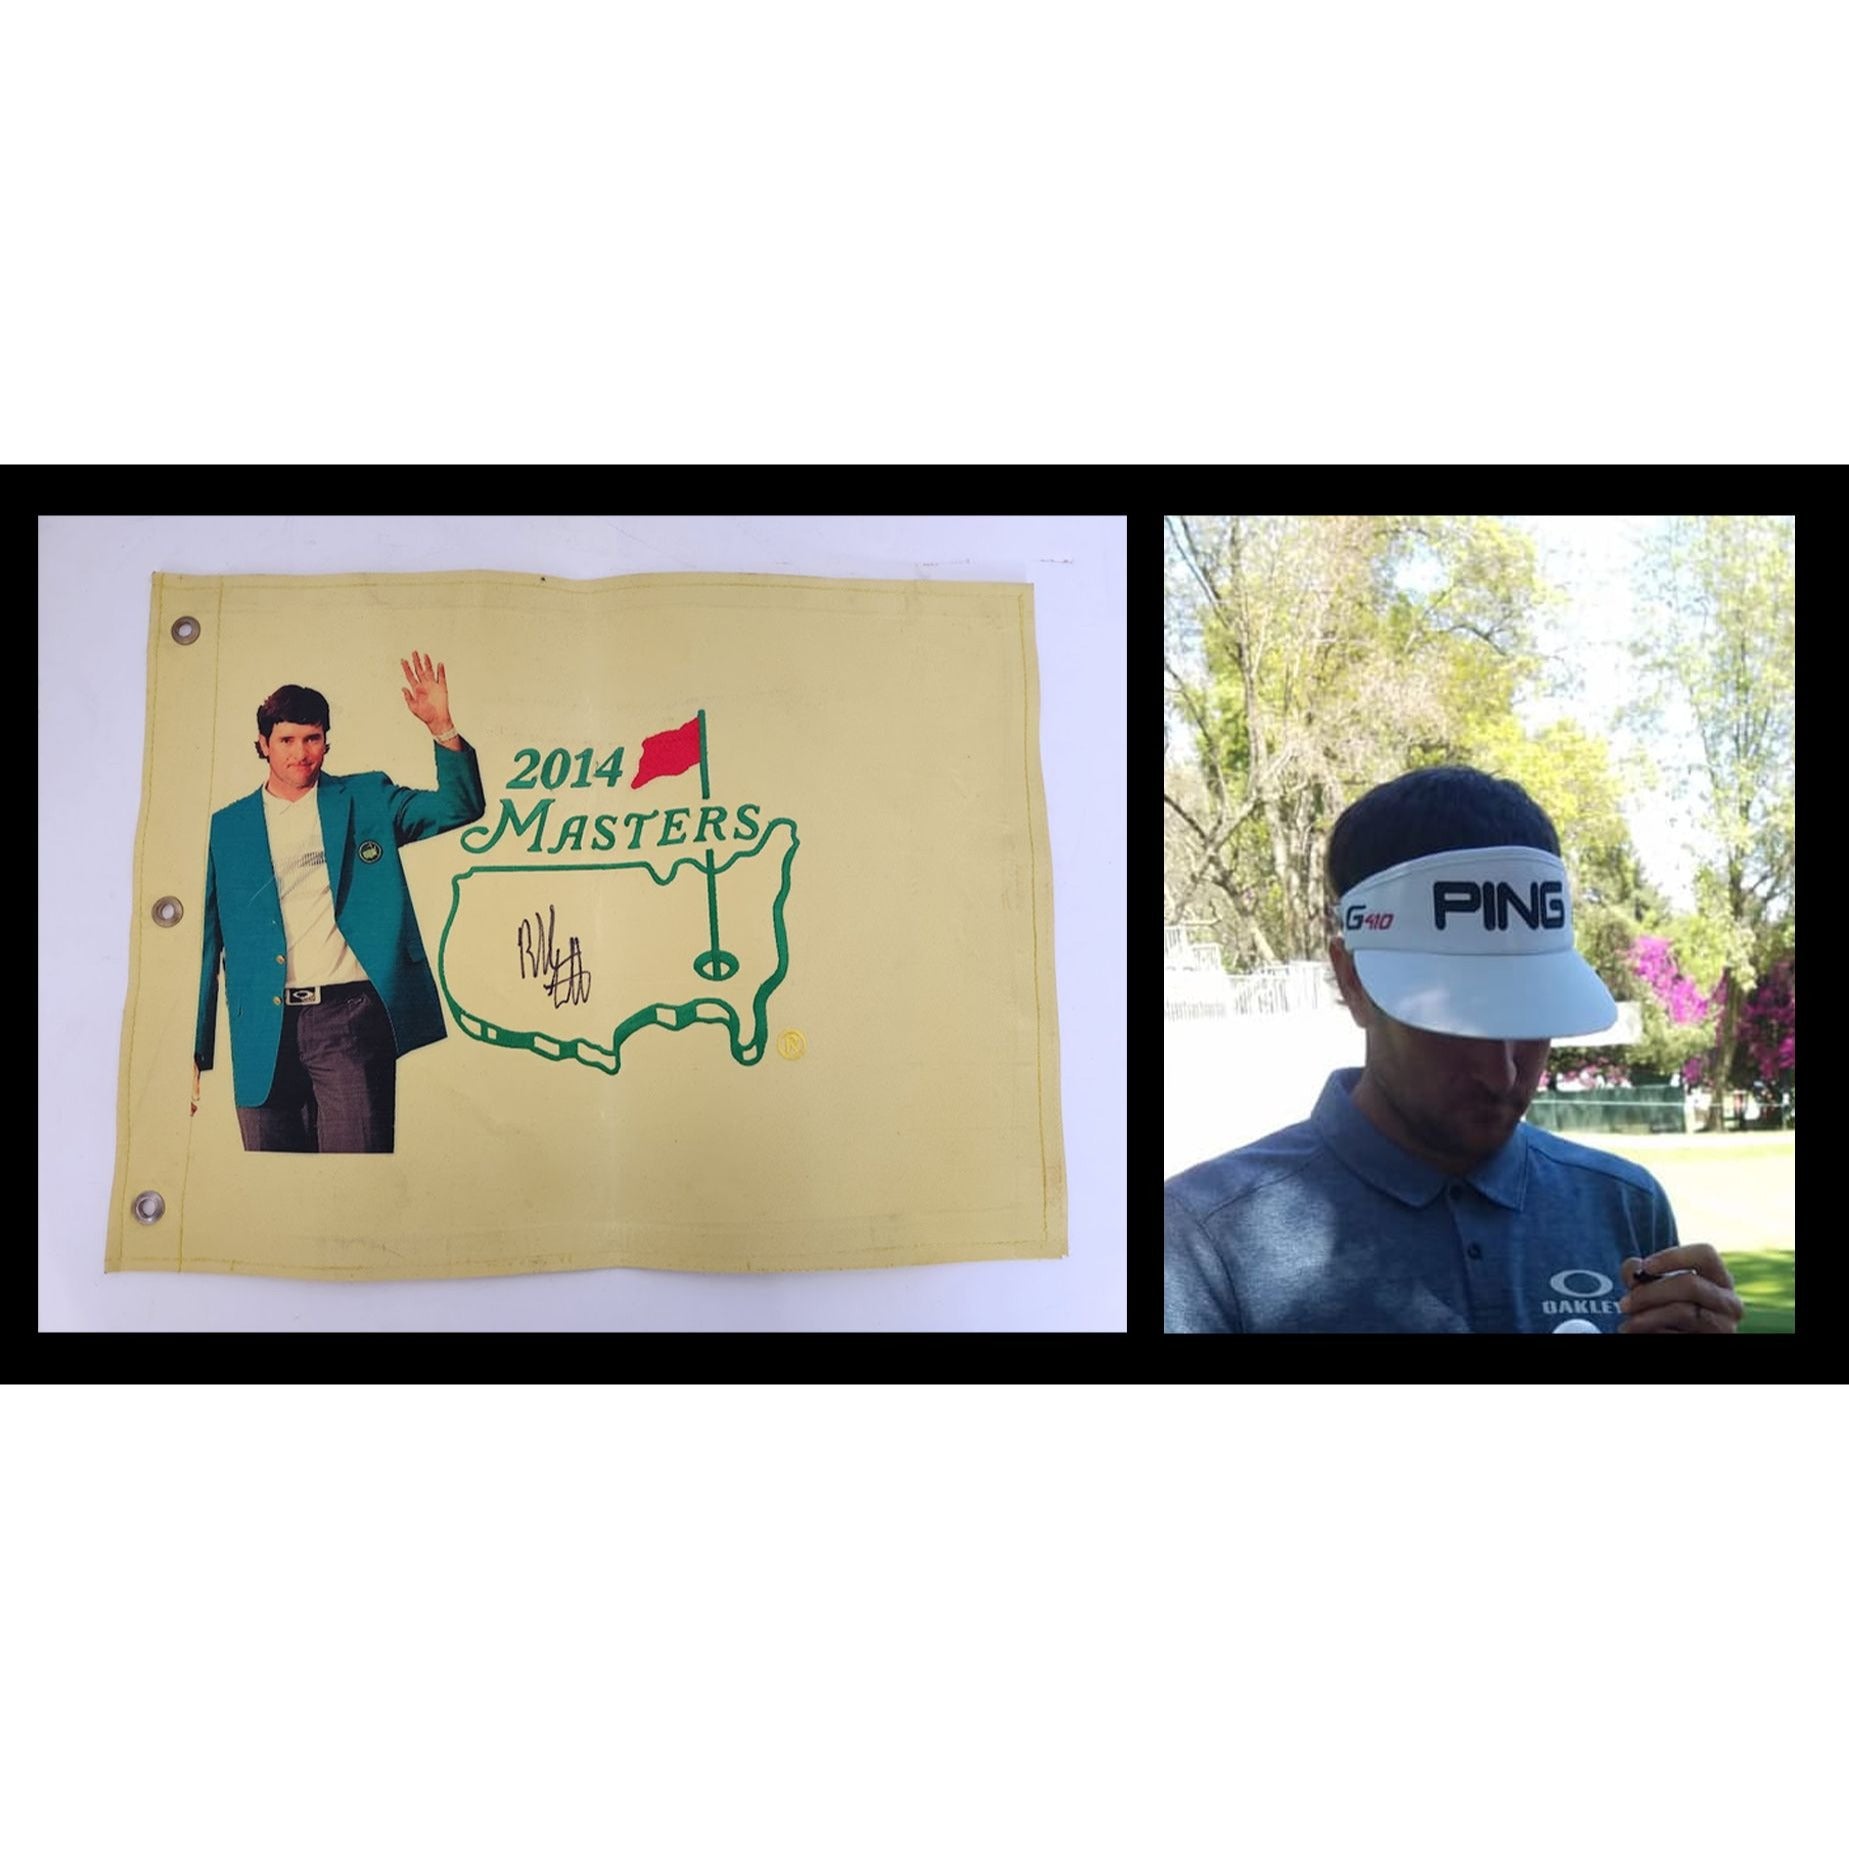 Bubba Watson 2014 Masters flag One of a Kind signed with proof